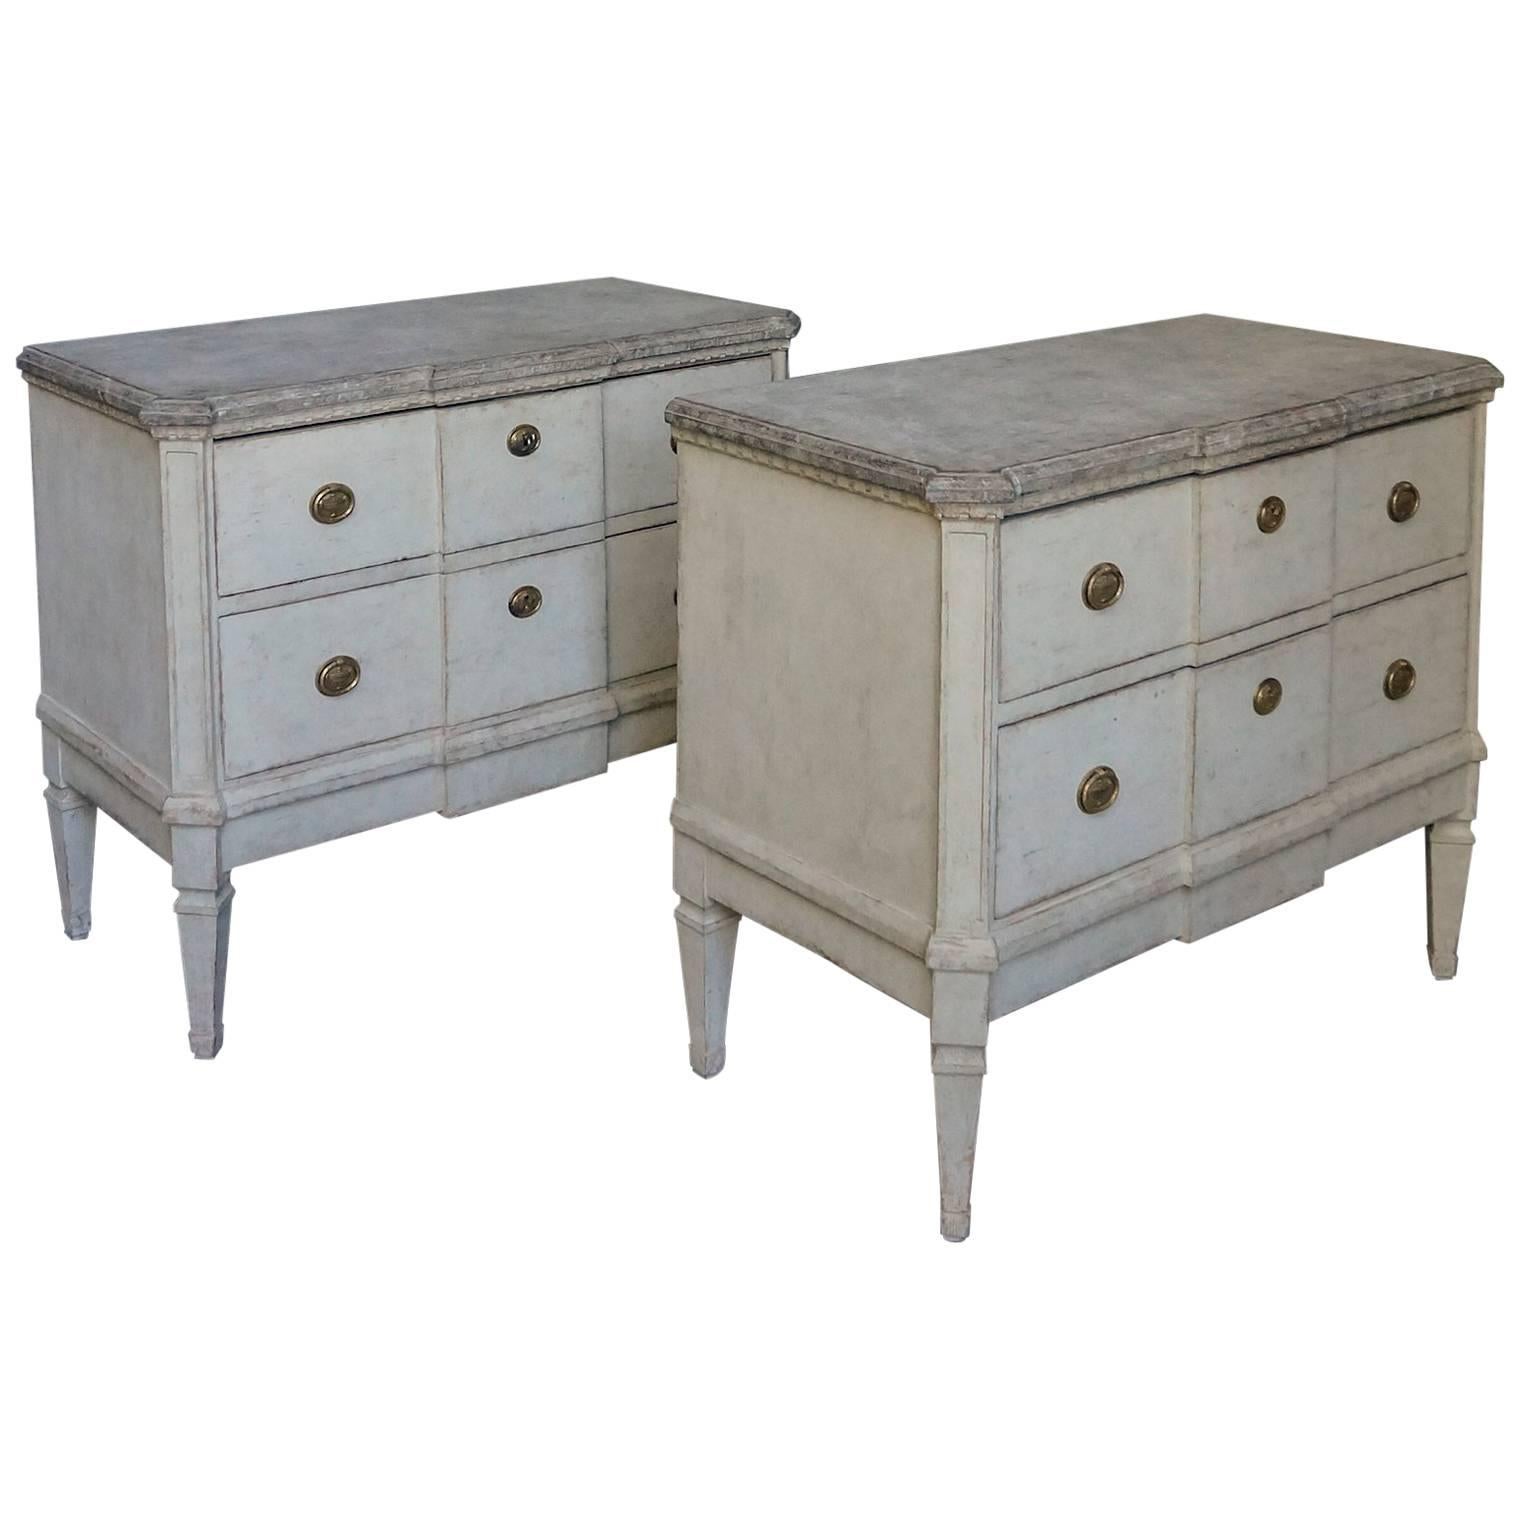 Pair of Swedish Commodes with Faux Marble Tops